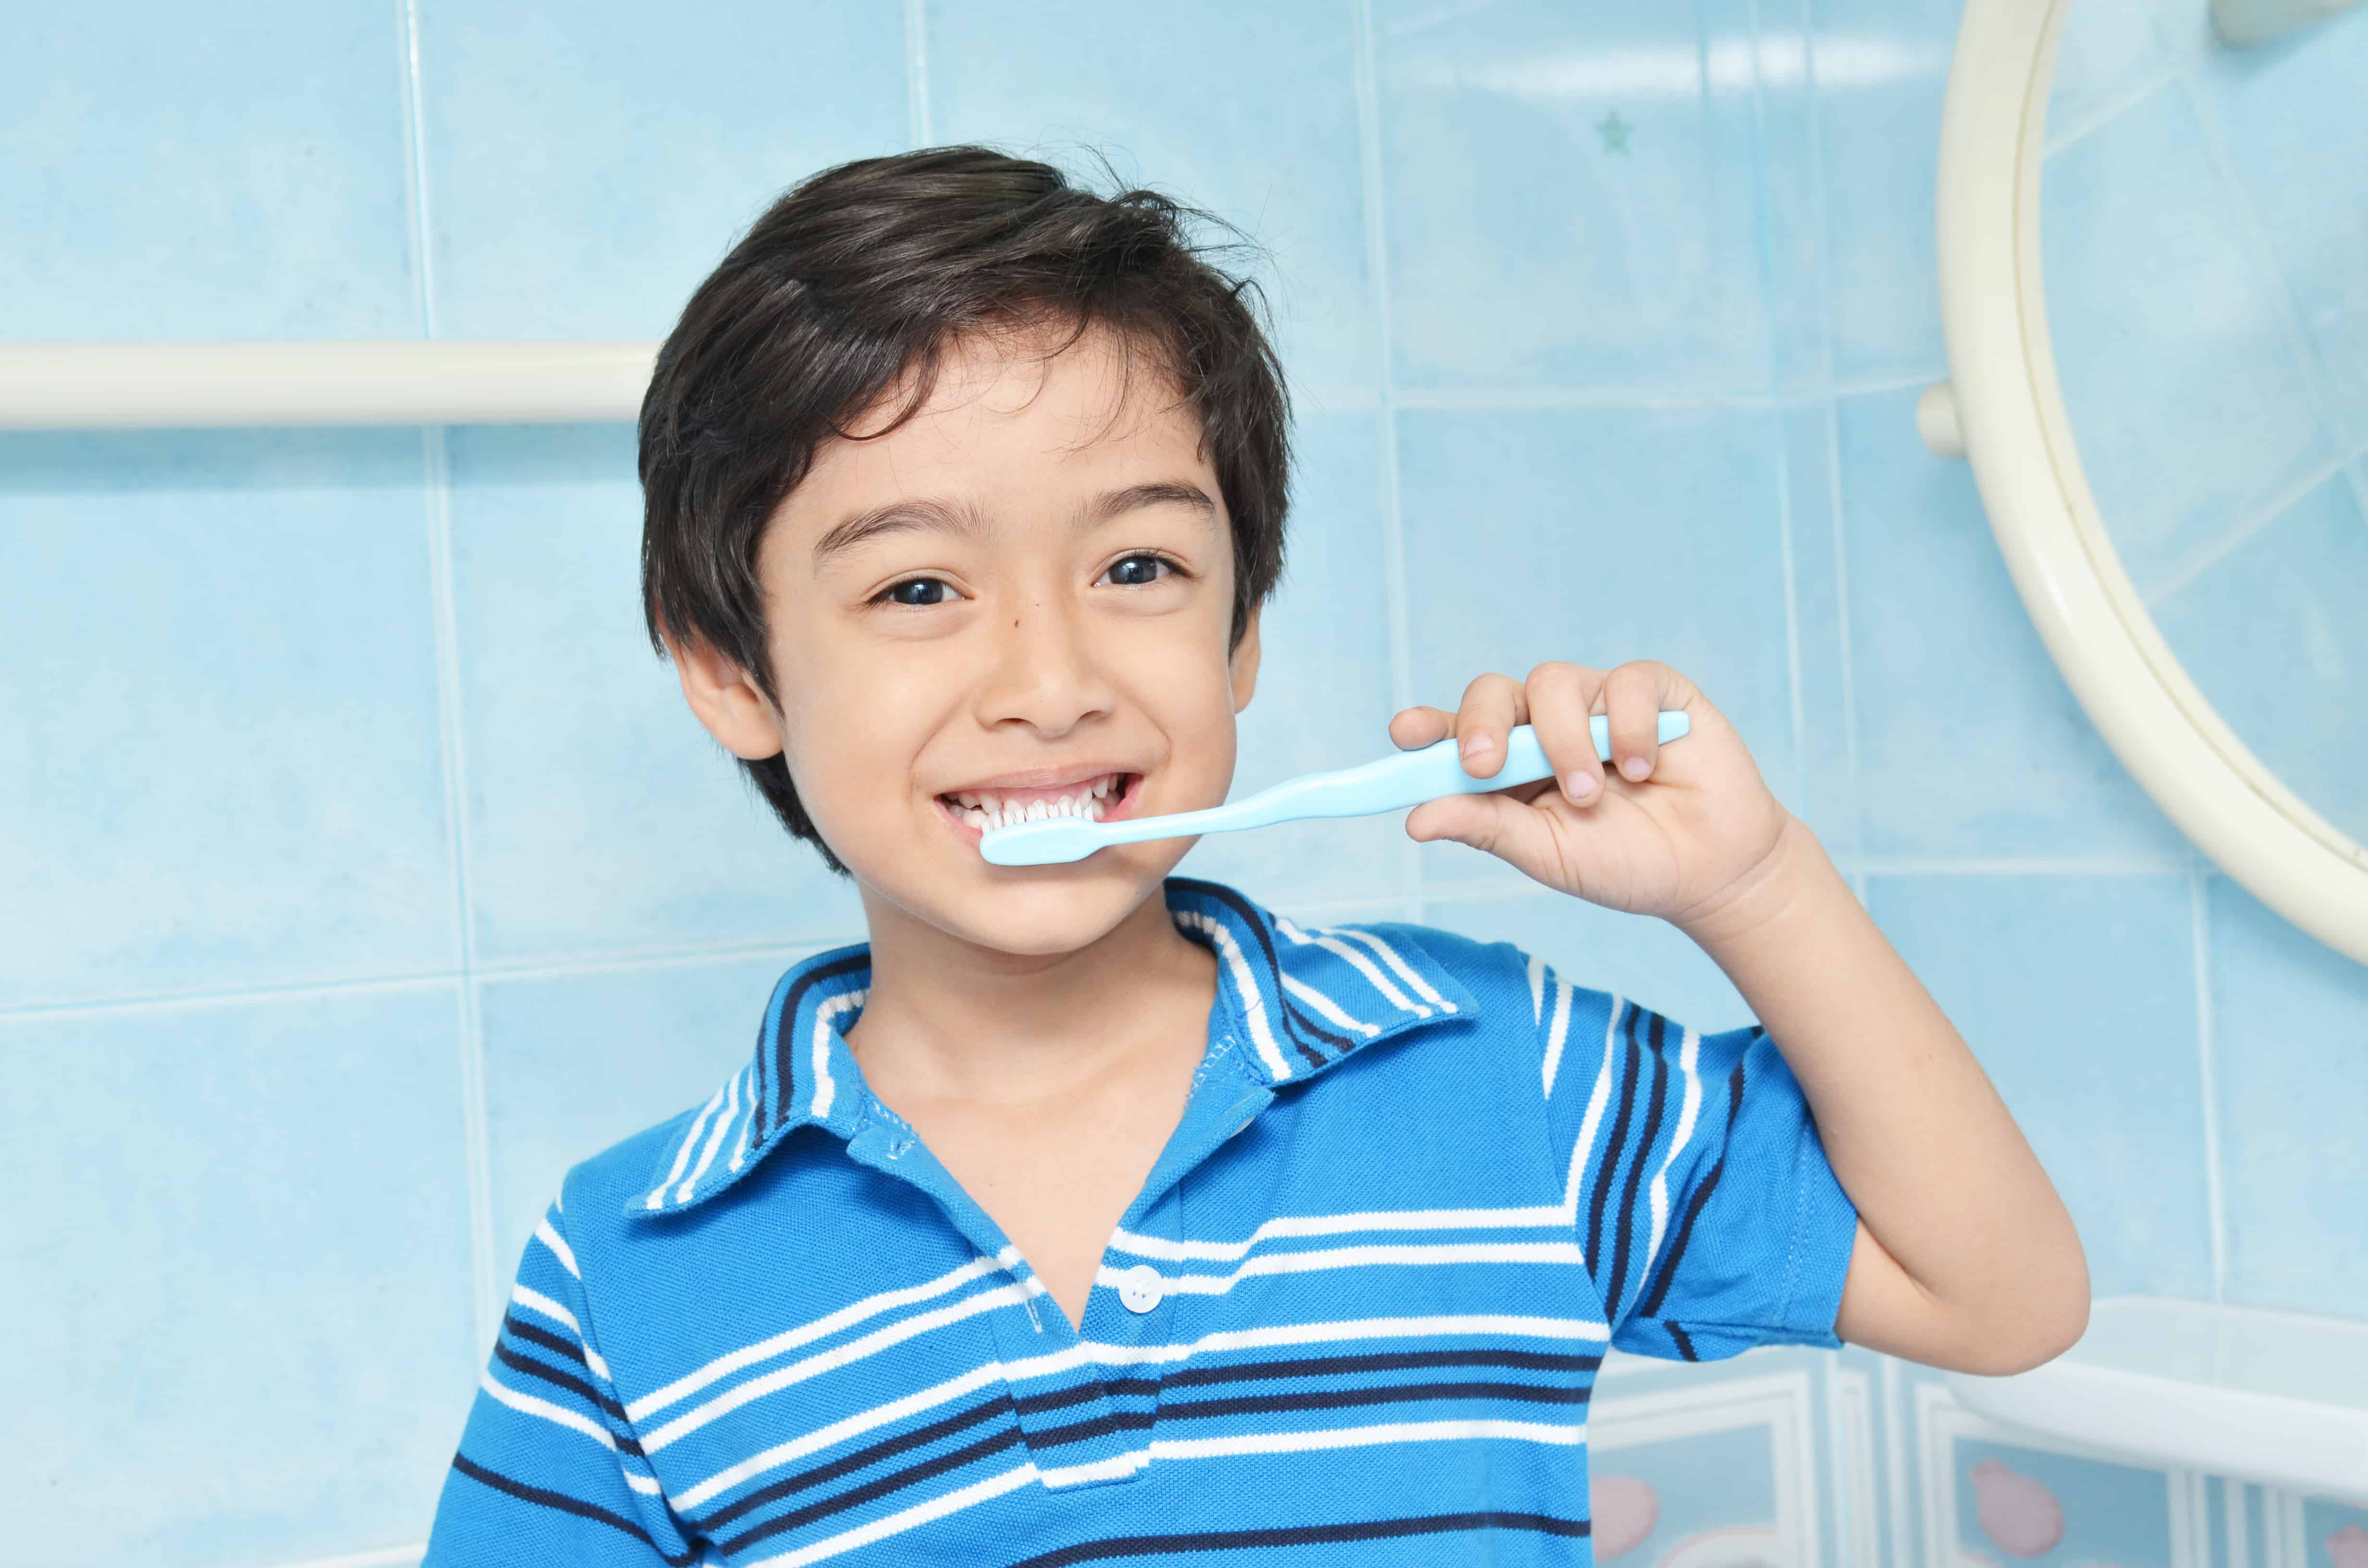 Teaching Young Children The Importance Of Good Dental Care